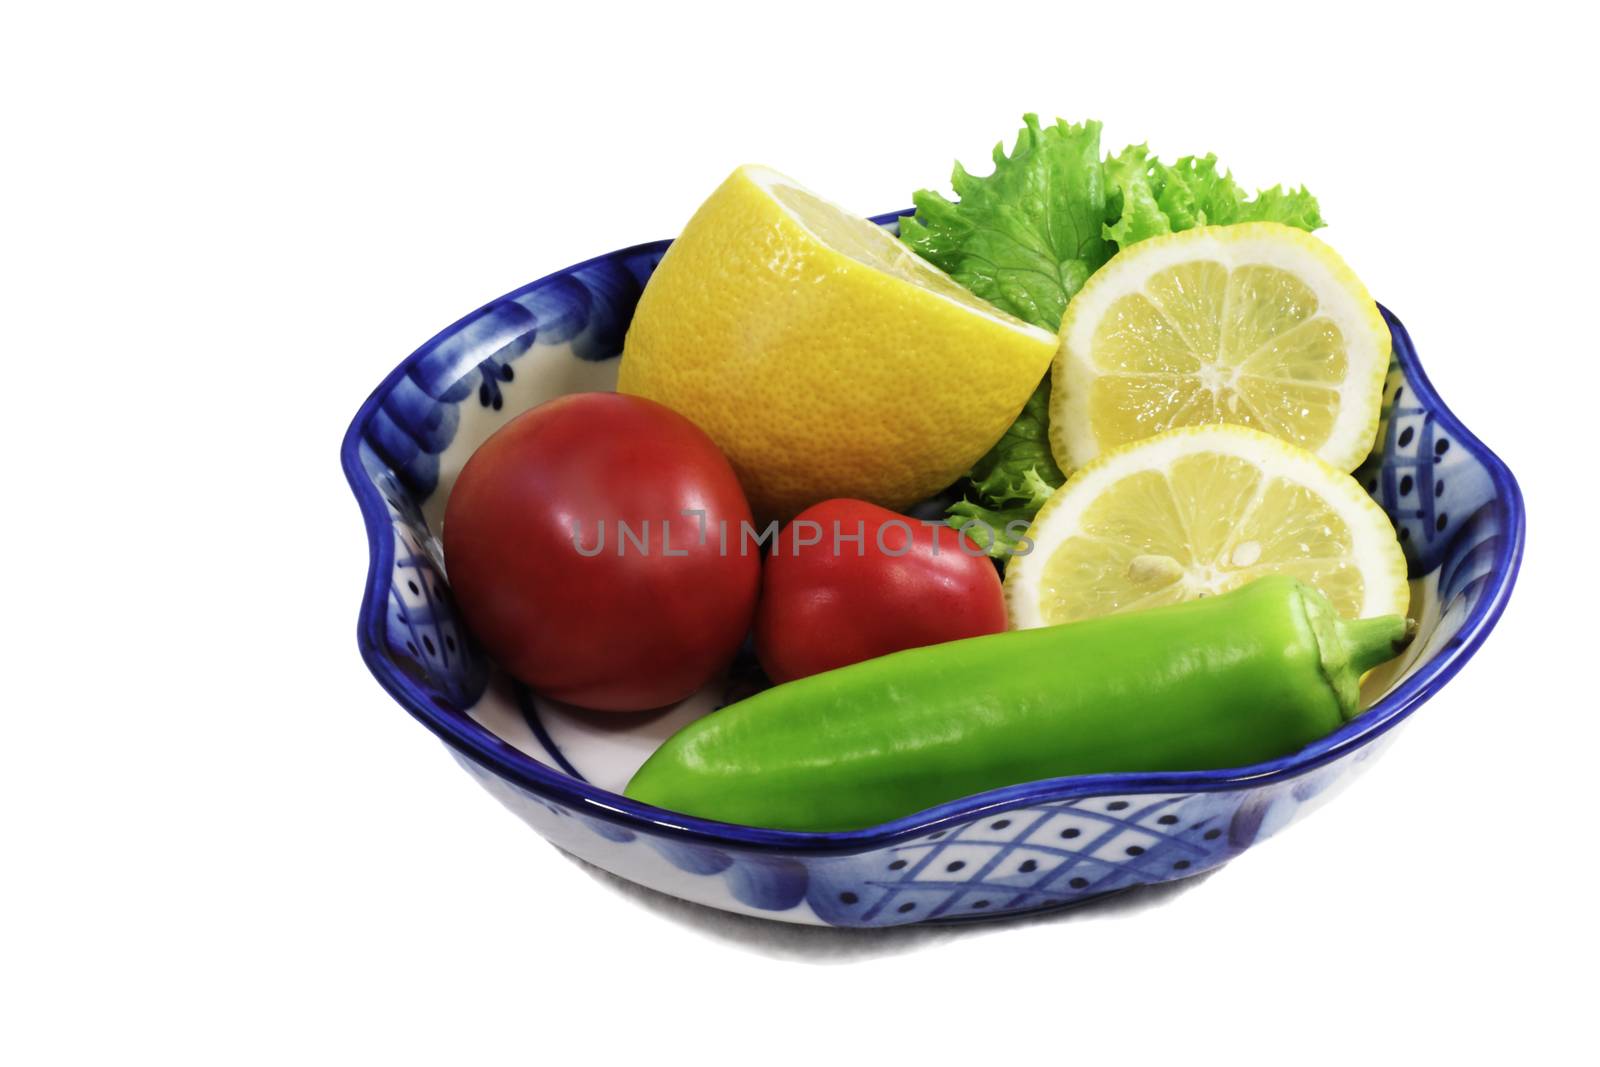 Vase with fruit and vegetables on a white background. by georgina198